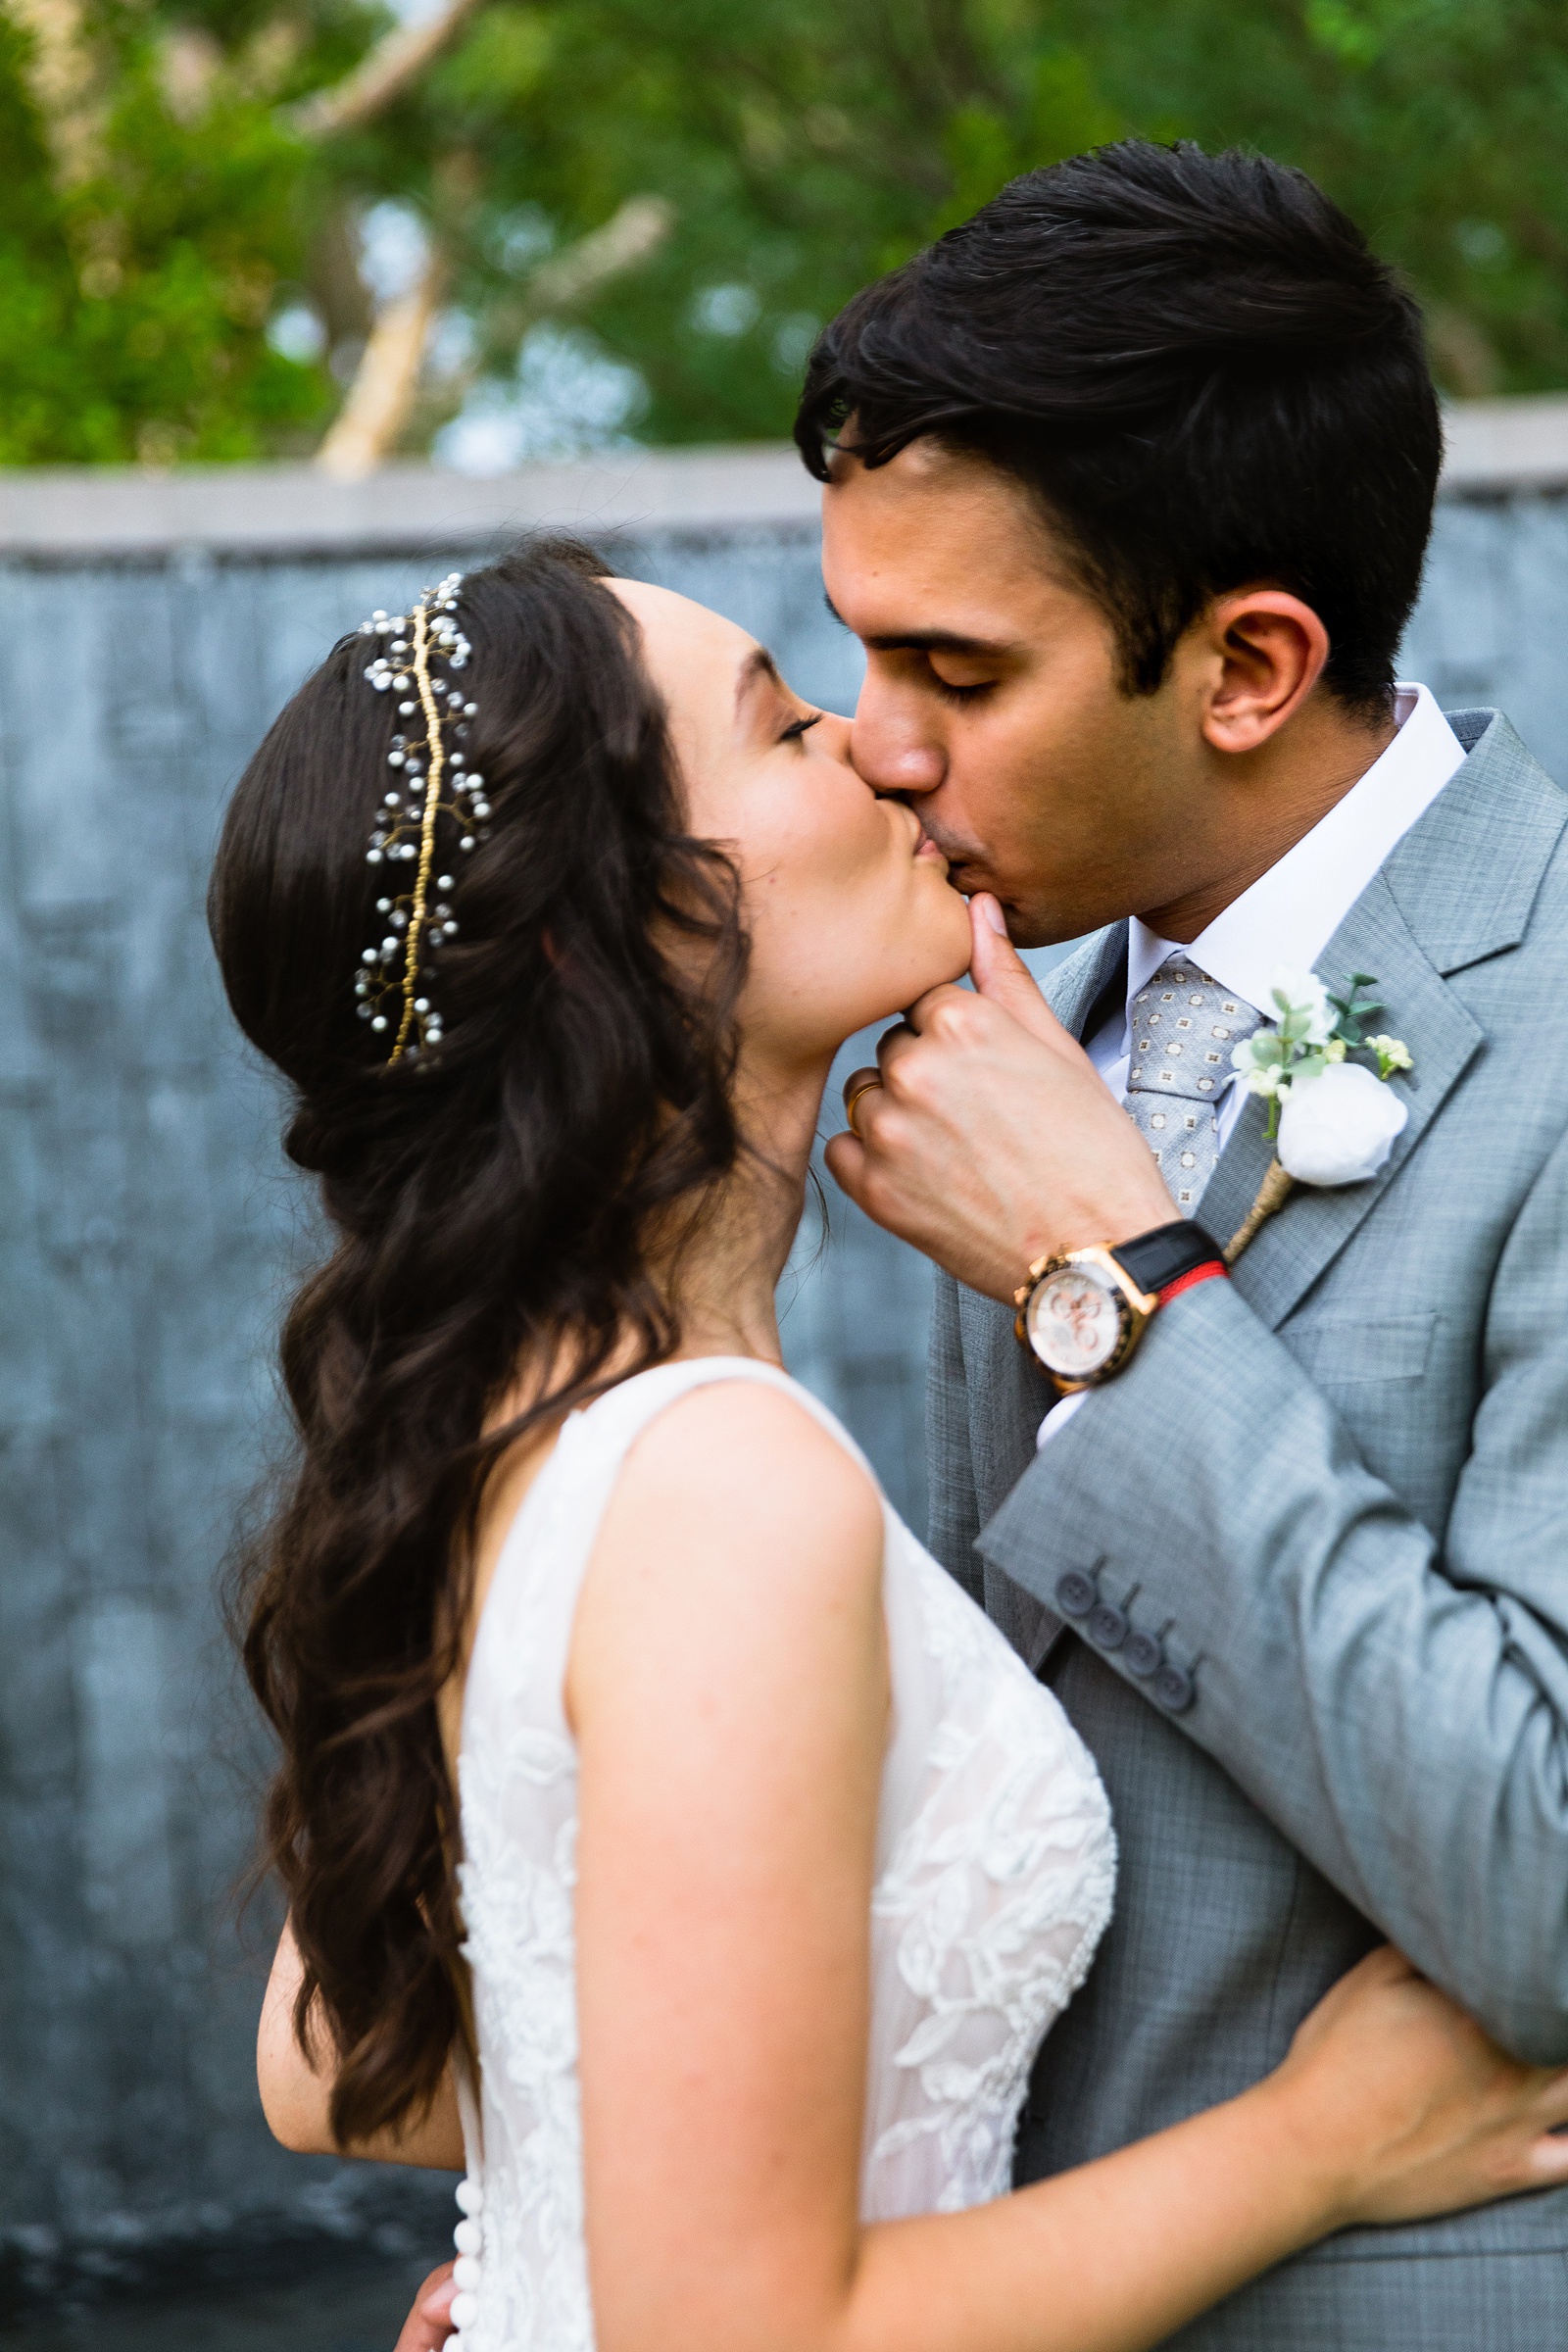 Bride and groom share a kiss during their Hyatt Regency Scottsdale Resort & Spa At Gainey Ranch wedding by Scottdsale wedding photographer PMA Photography.